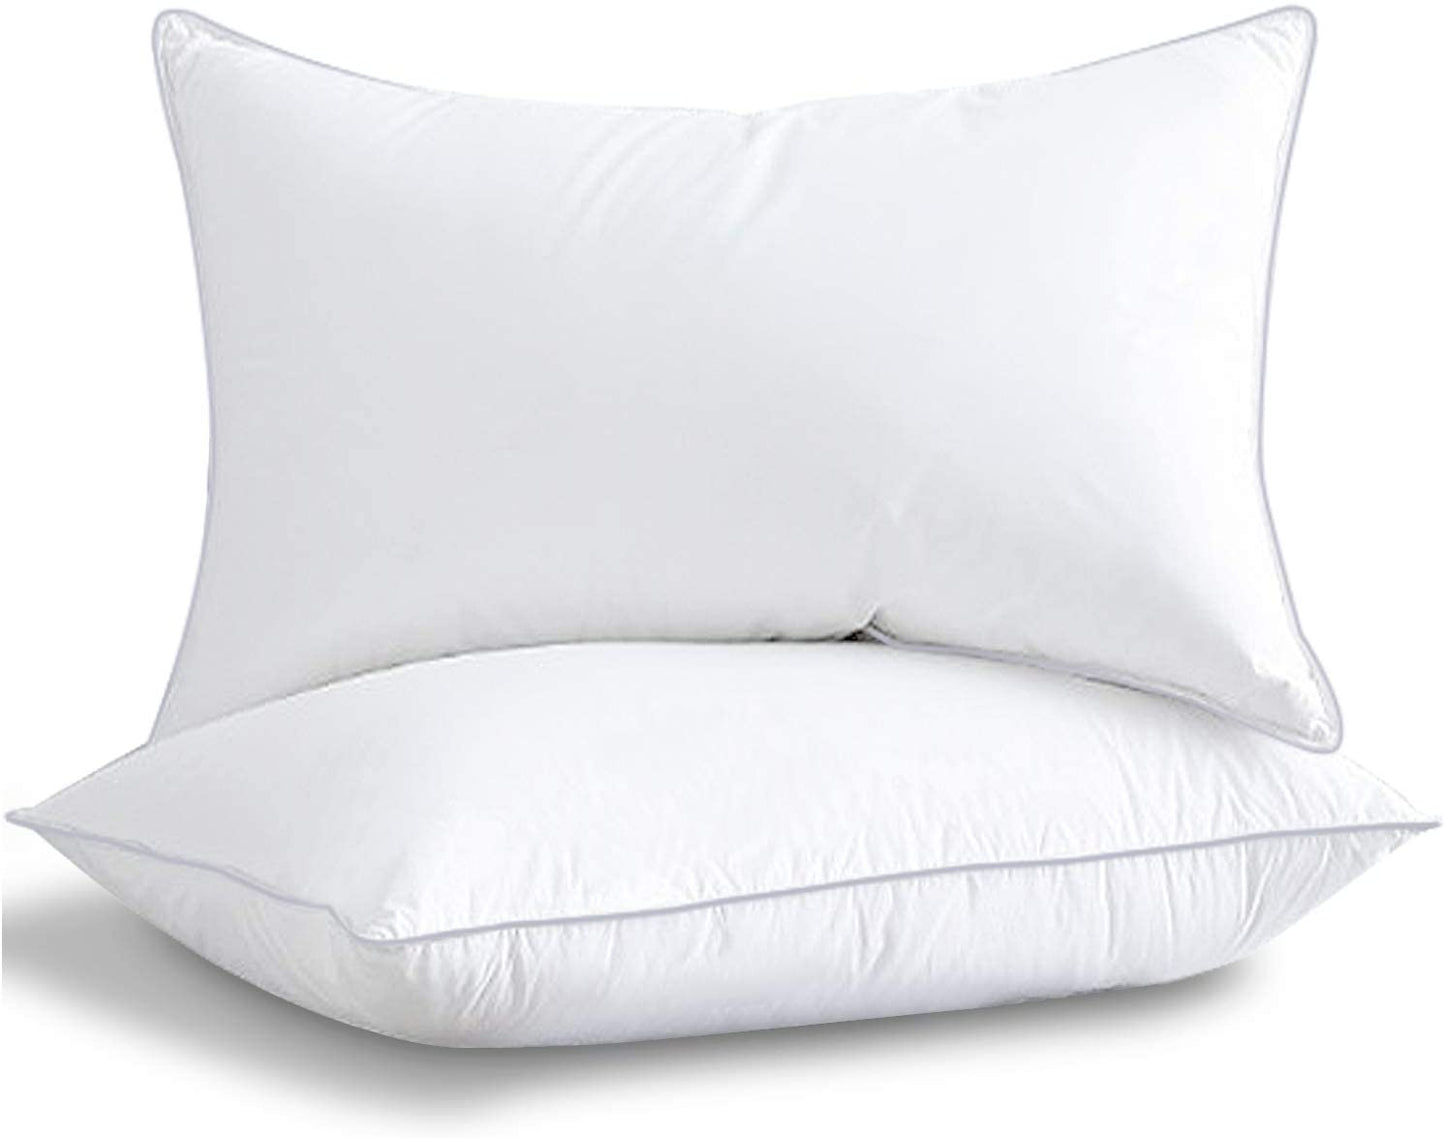 Gel Pillow in Egyptian Cotton